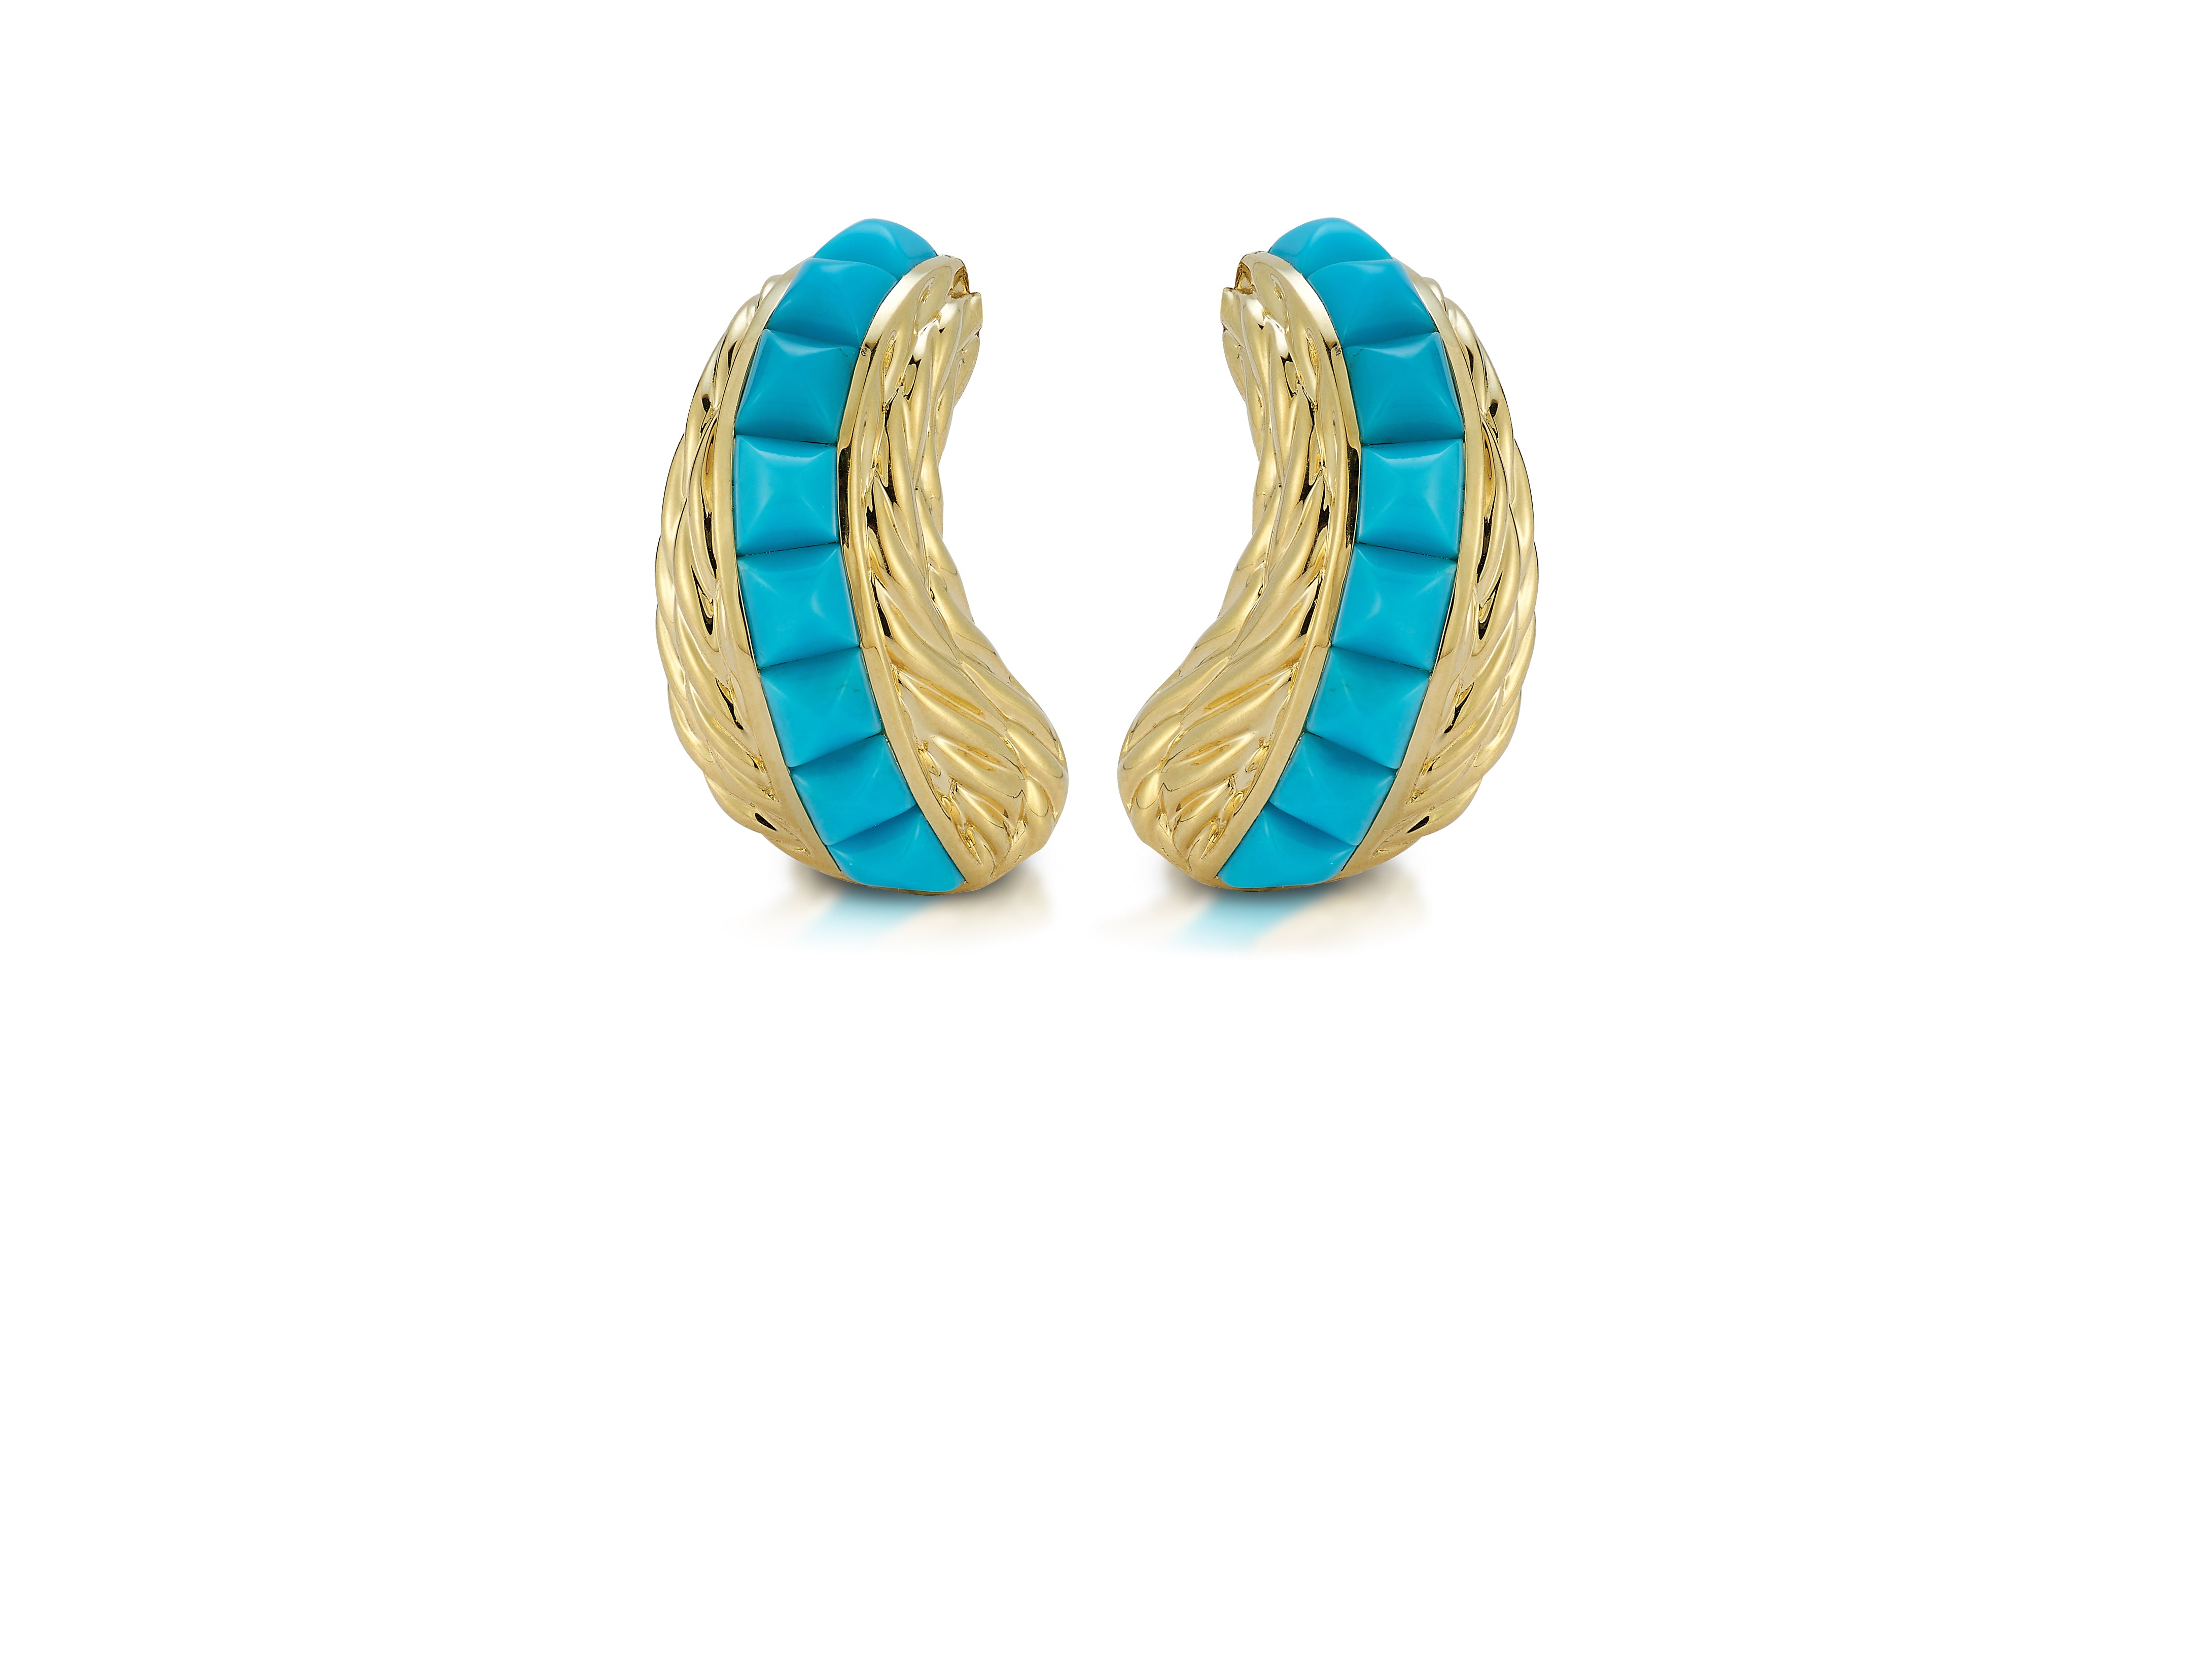 Rope Earrings with Turquoise and Gold Rope